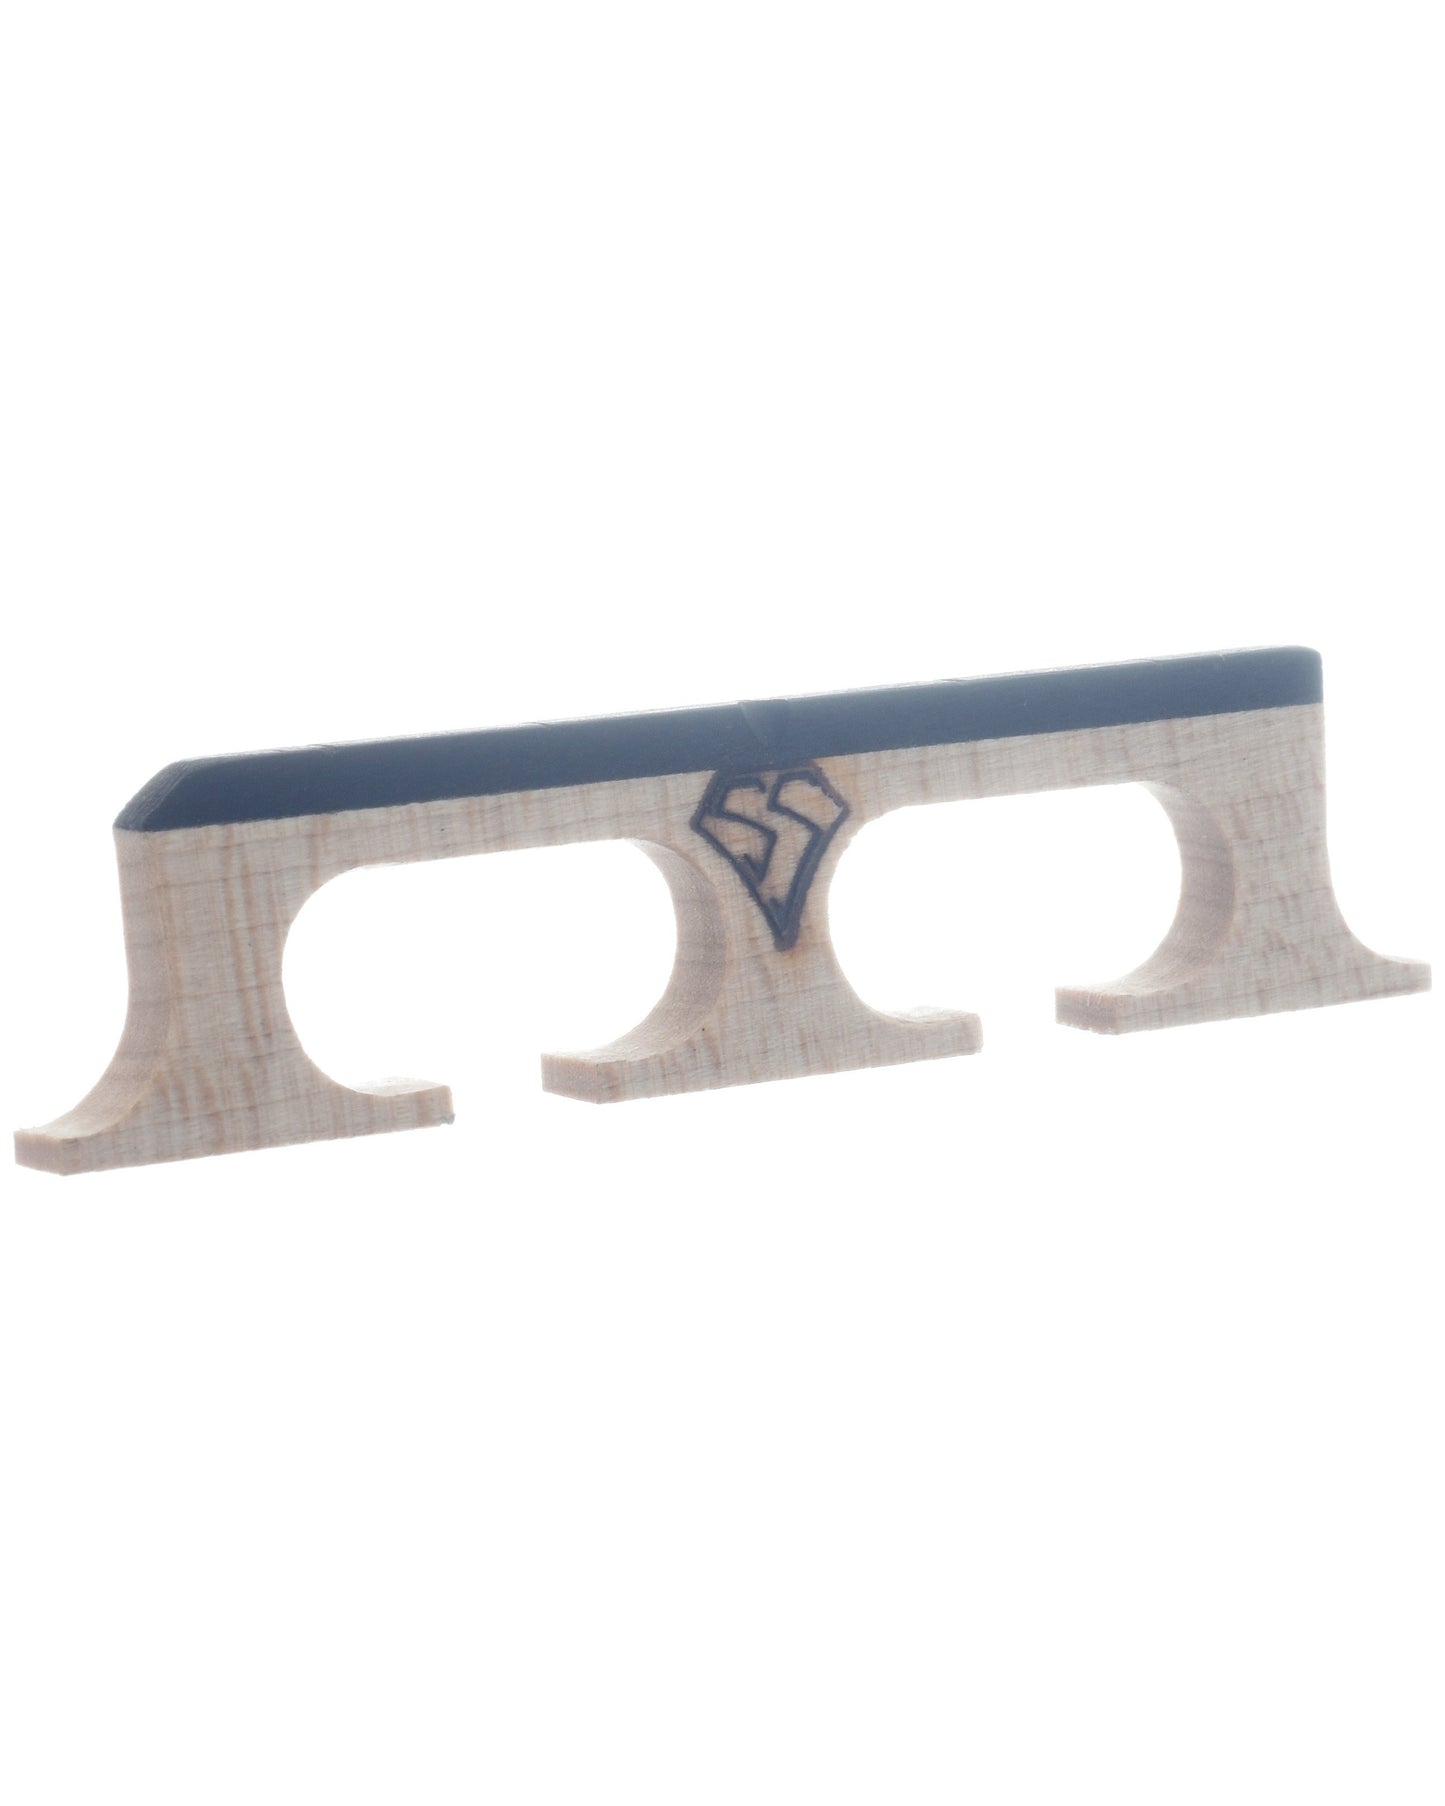 Image 1 of Snuffy Smith New Generation Banjo Bridge, Compensated 11/16" Crowe Spaced - SKU# SSCOMP-11/16-C : Product Type Accessories & Parts : Elderly Instruments